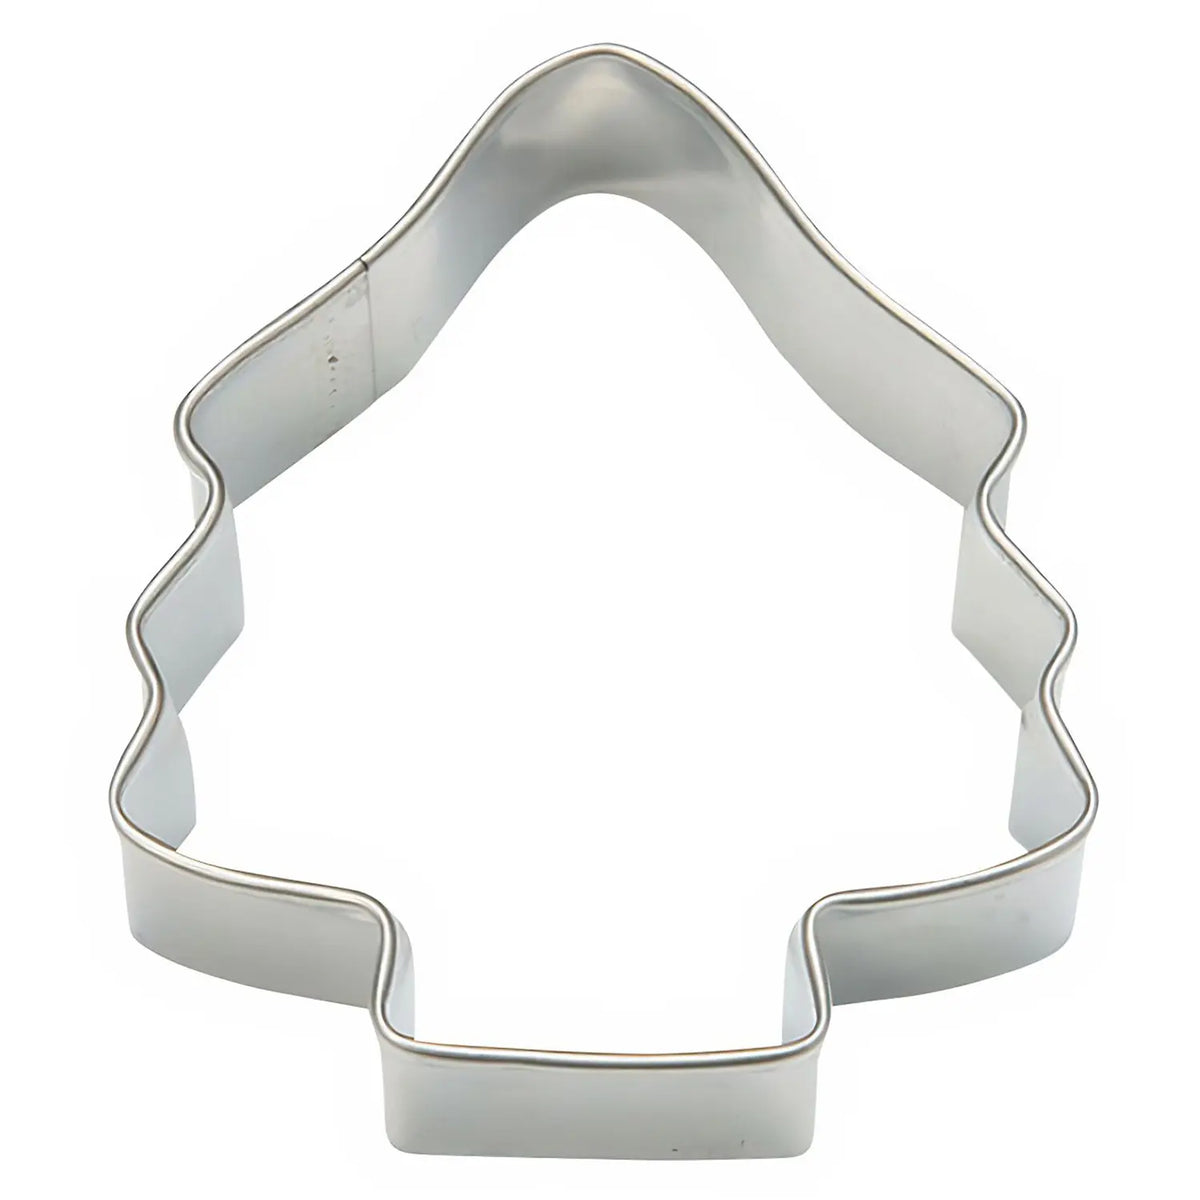 TIGERCROWN Cake Land Stainless Steel Cookie Cutter Christmas Tree